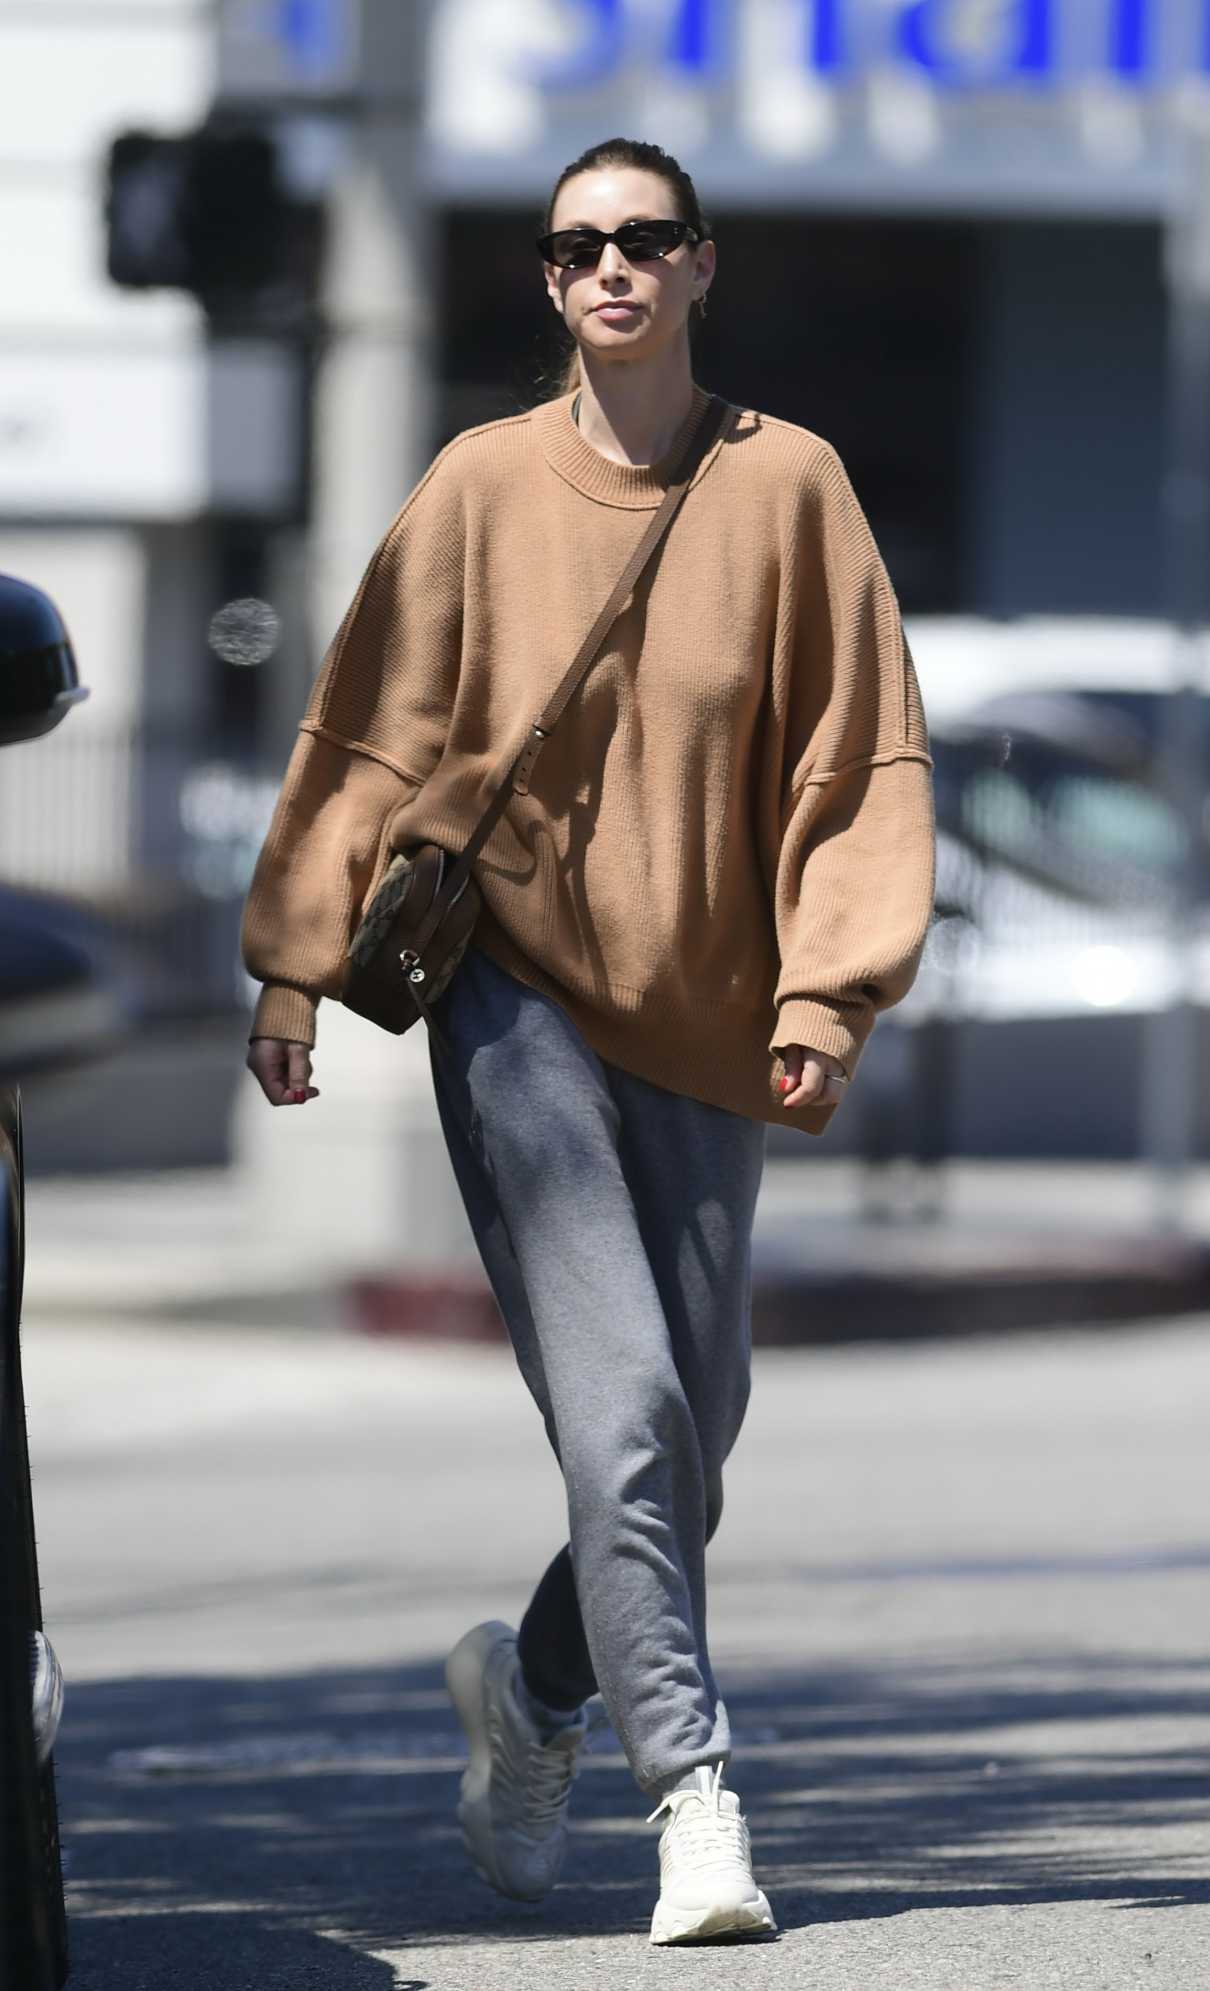 Whitney Port in a Tan Sweater